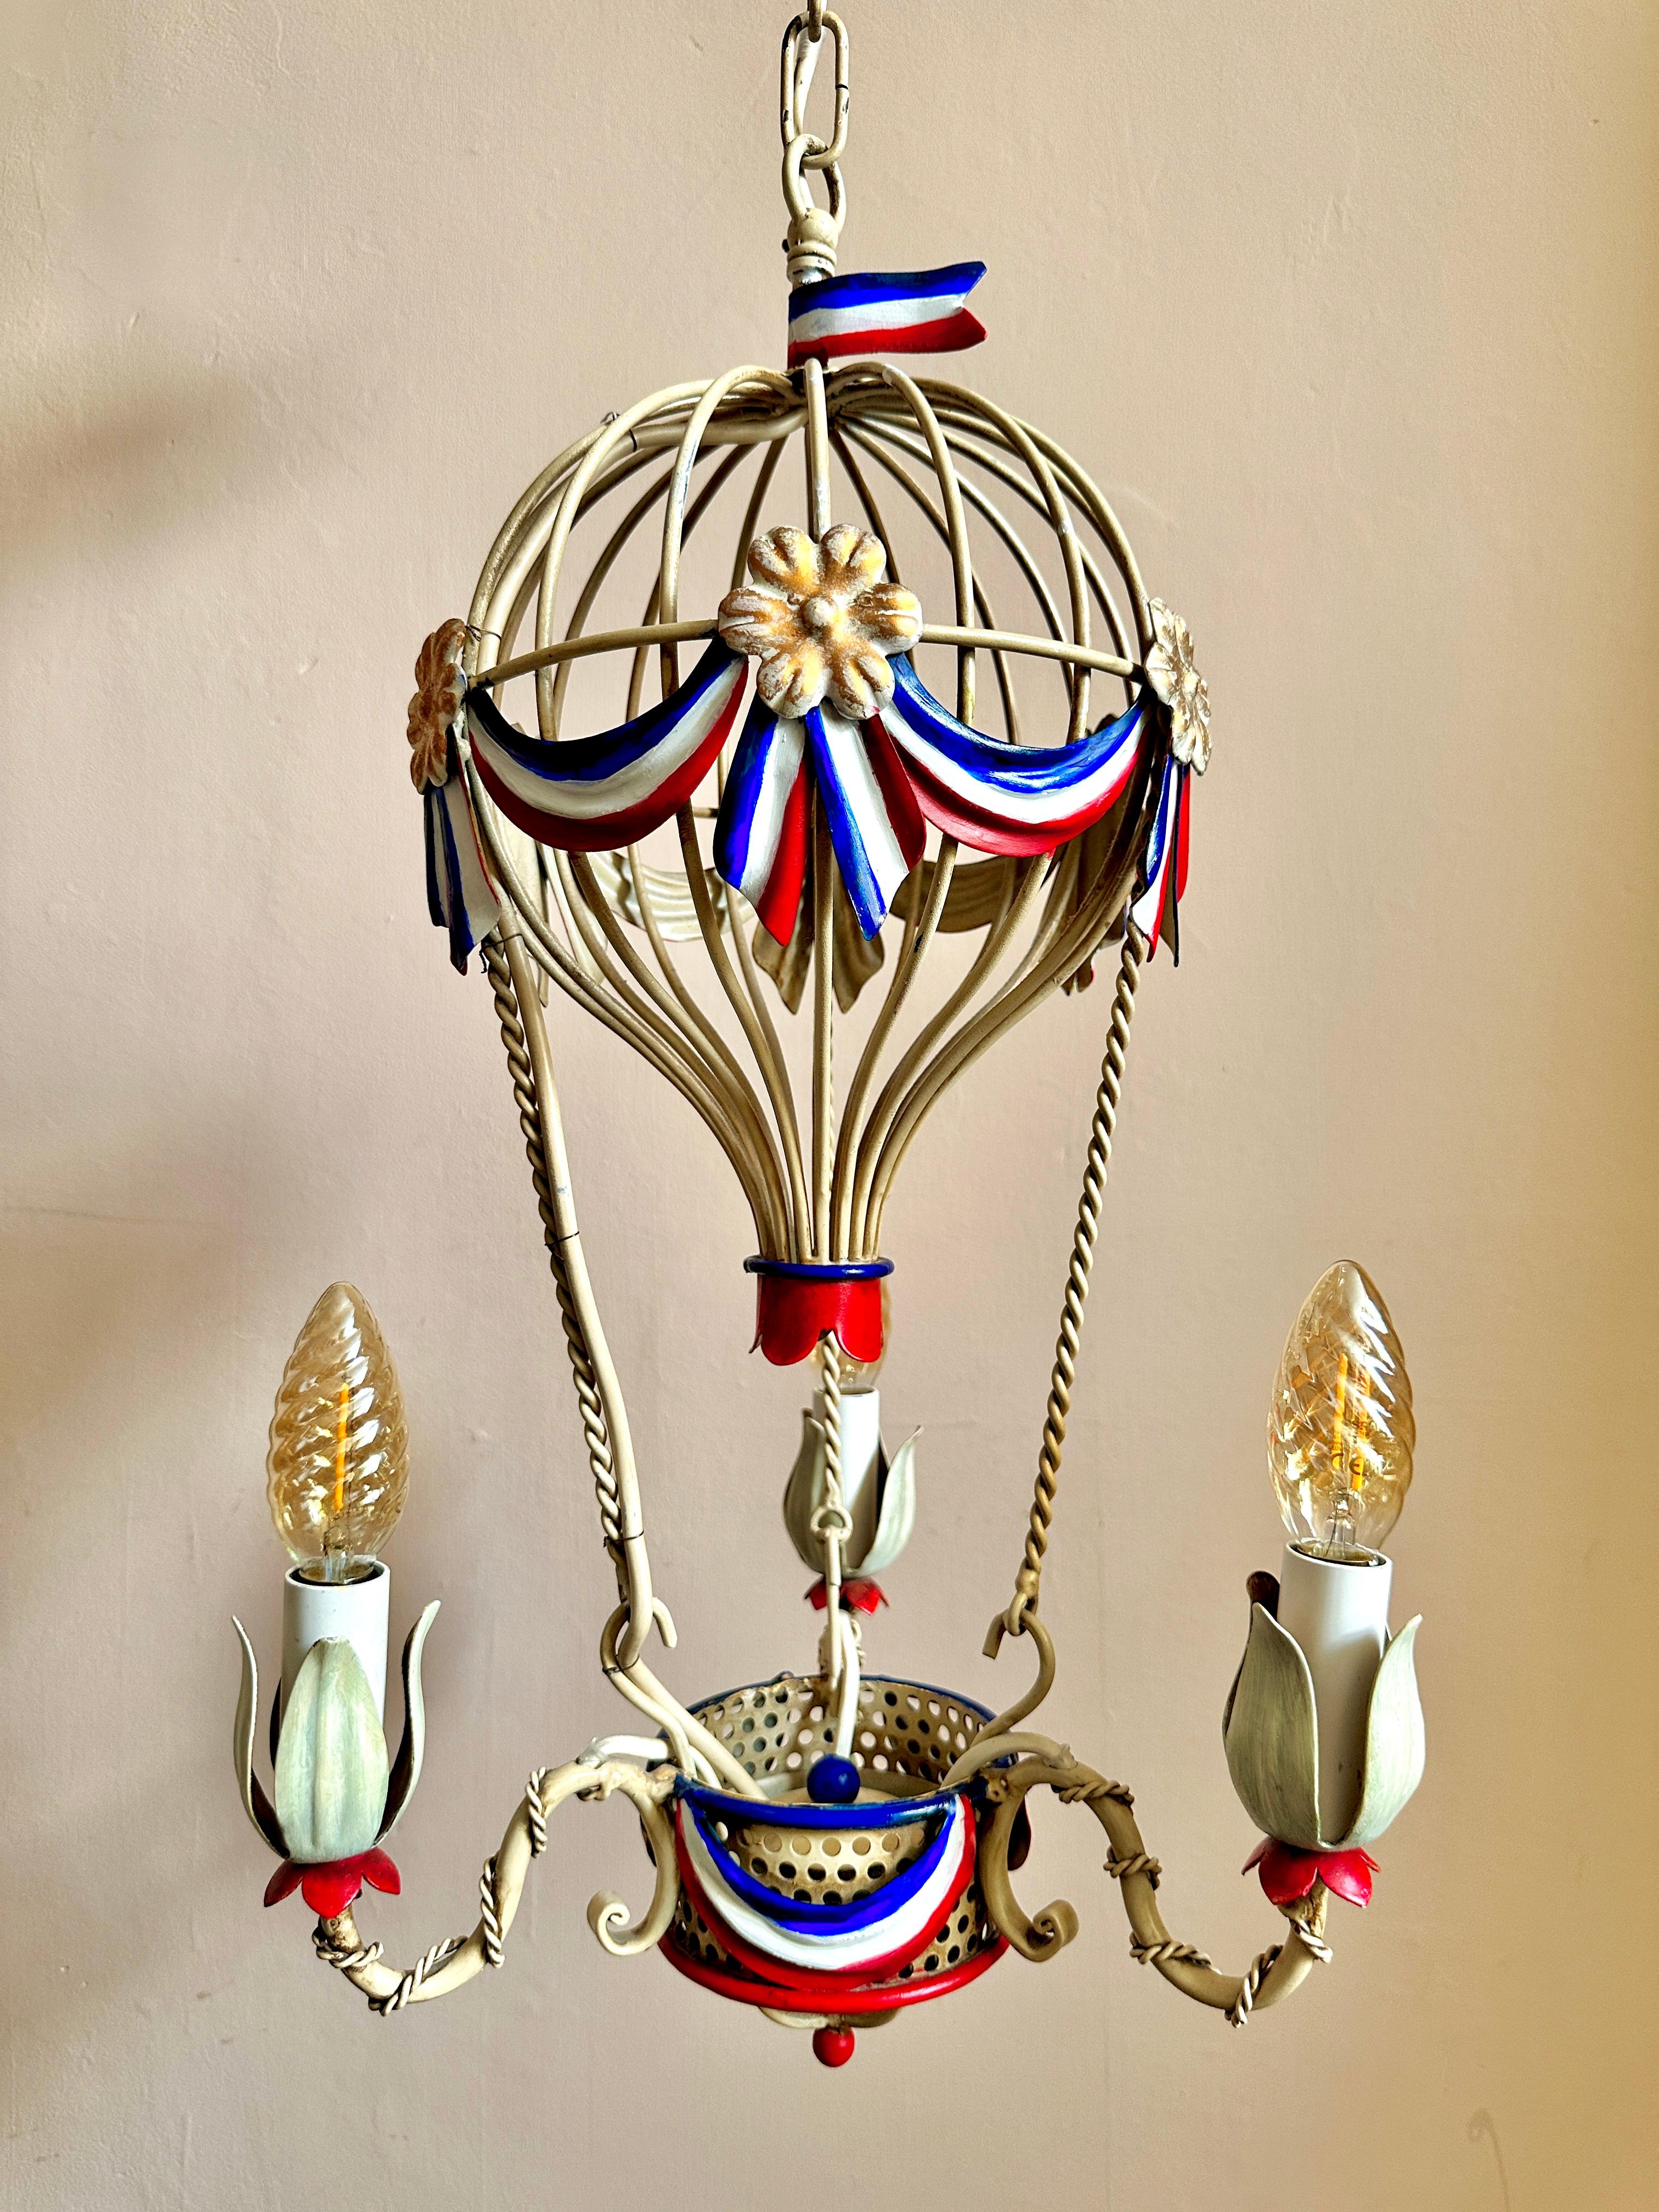 1960s Montgolfier tole chandelier (two available).

Gorgeous hand-painted, three-arm Italian ceiling light based on the Montgolfier Brothers' hot-air balloon design. Decorated in the colours of the tricolore with gilt rosettes. In excellent